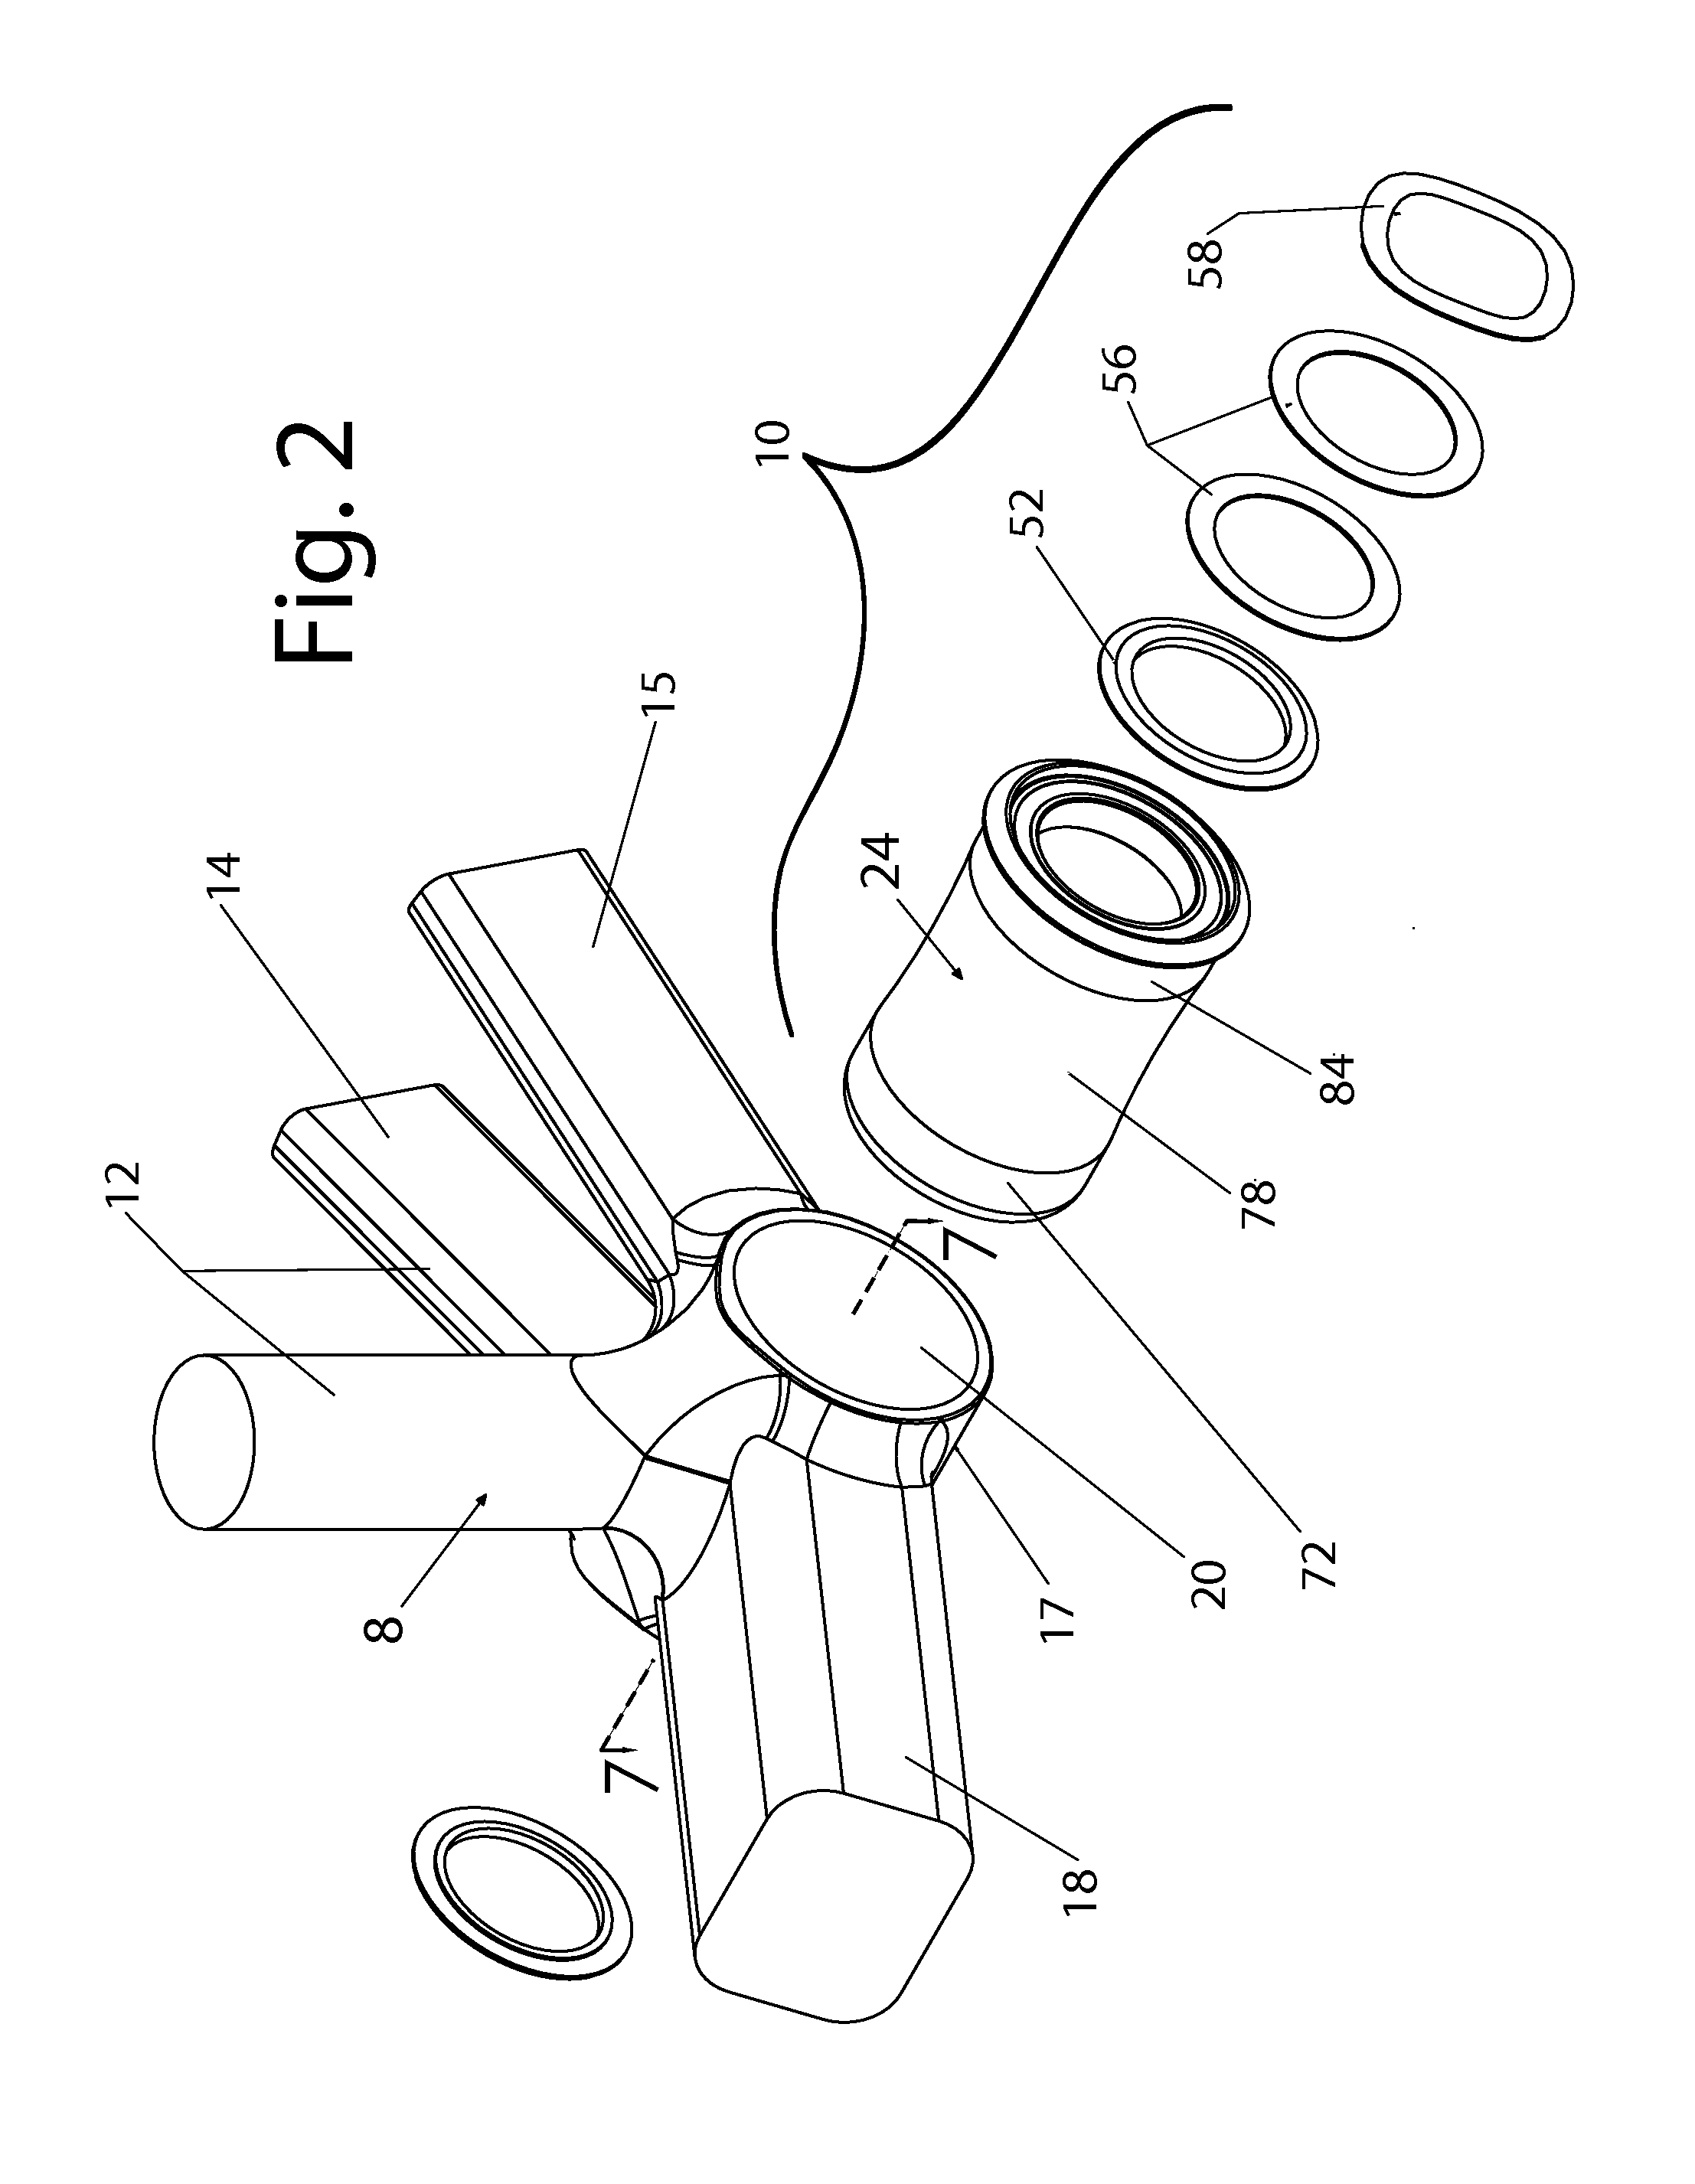 Bottom bracket for bicycles